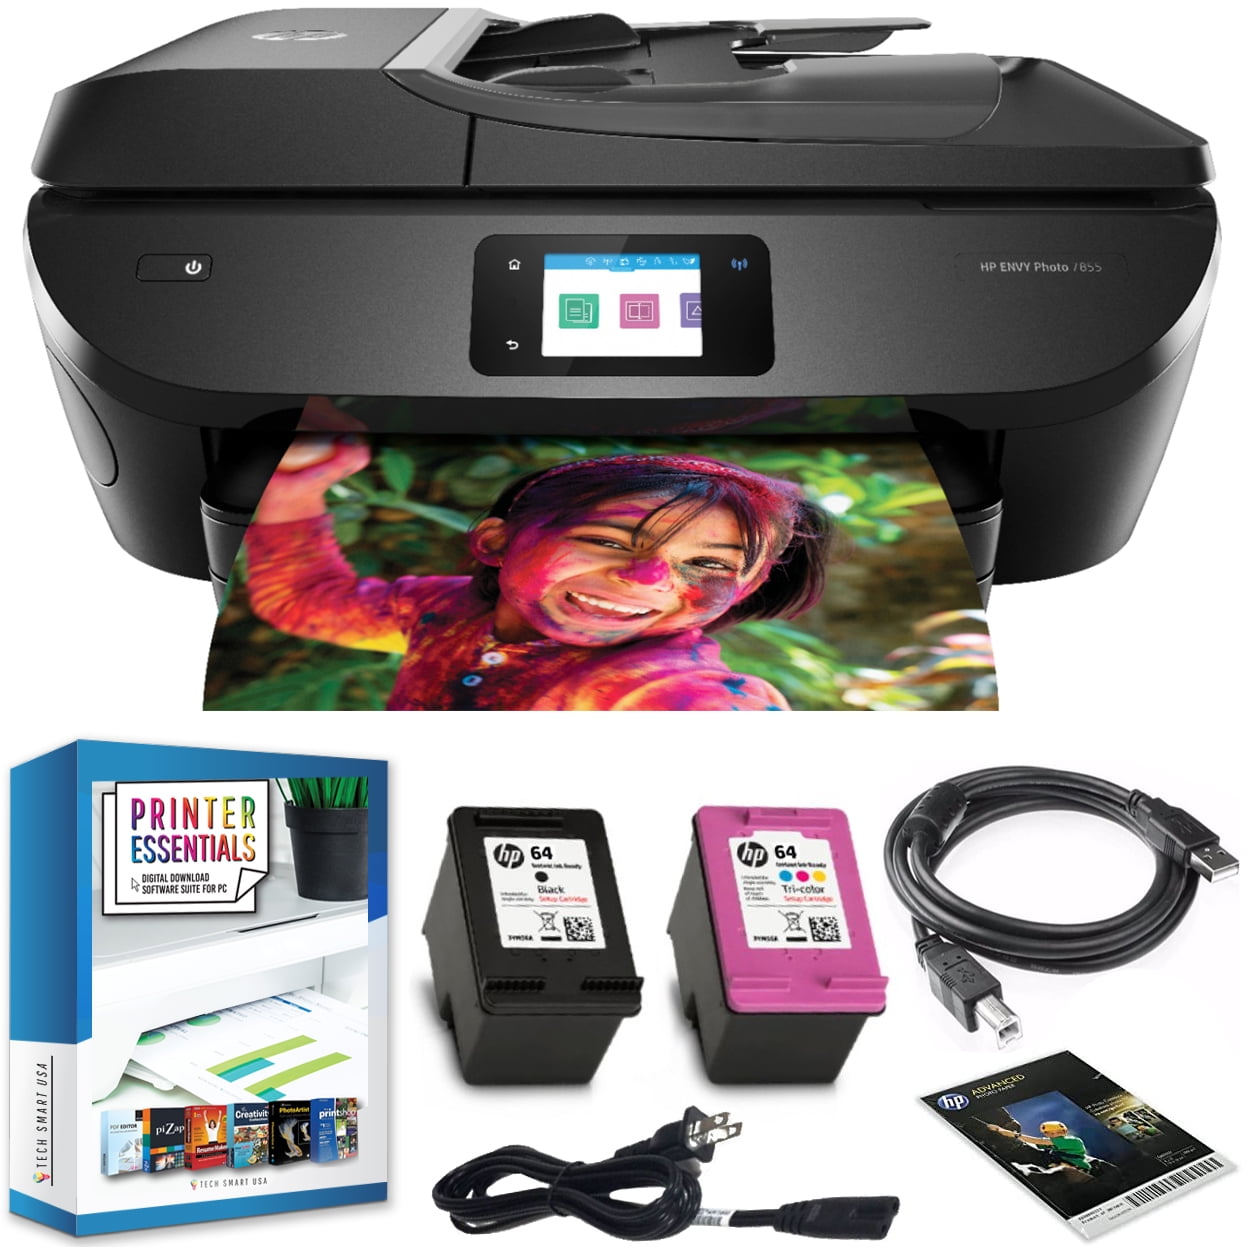 Renewed HP Envy Photo 7855 All-in-One Printer with Wireless Direct Printing 